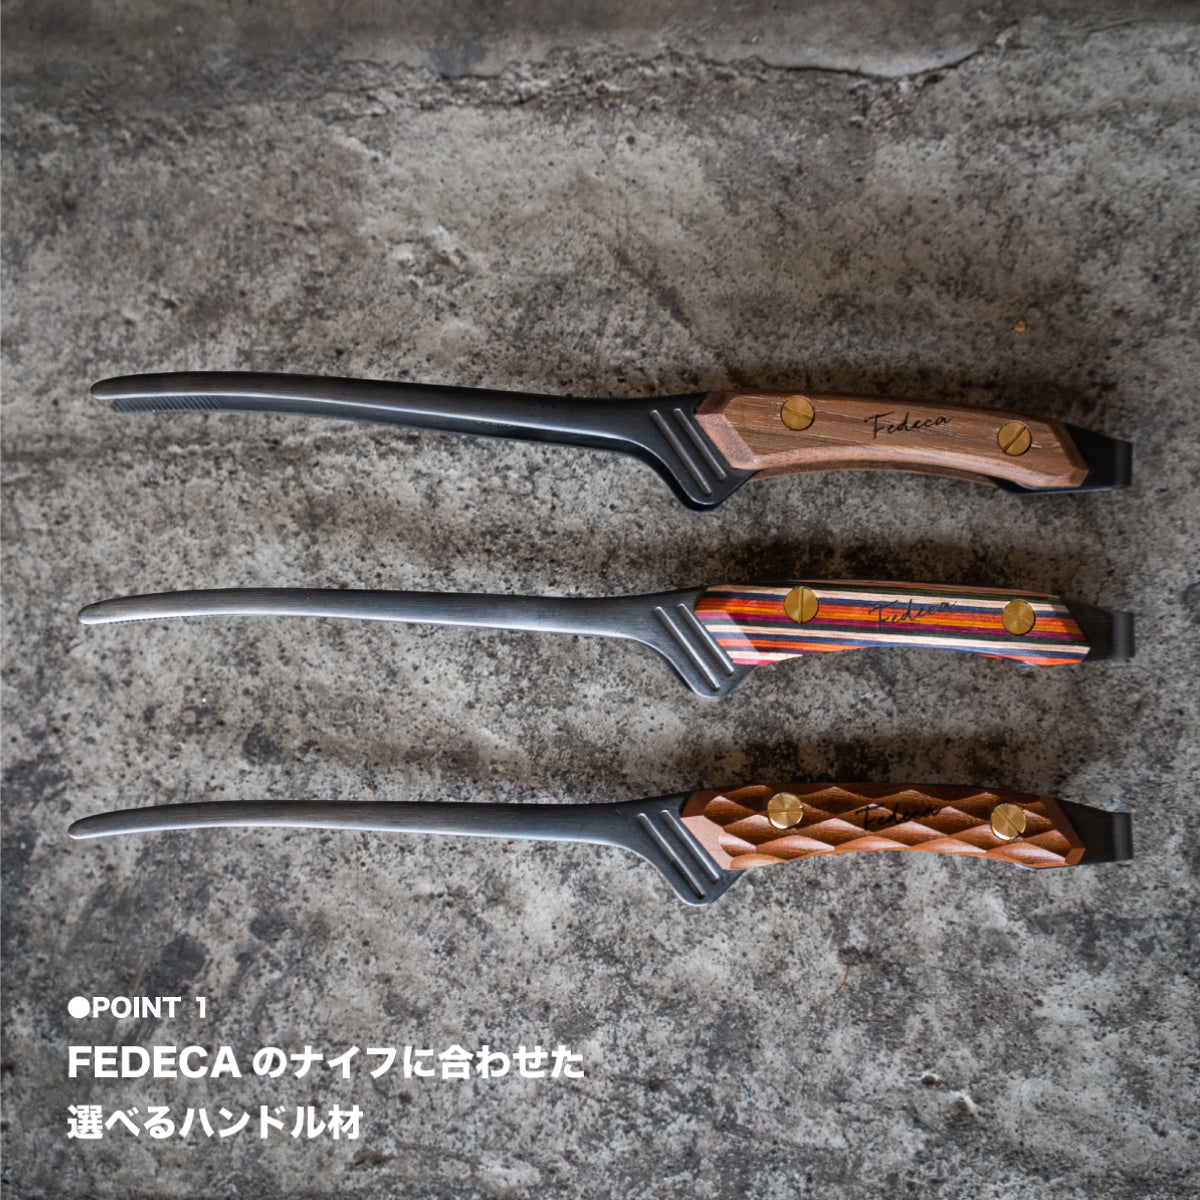 【NEW】FEDECA CLEVER TONG プレーン黒檀 7,150円